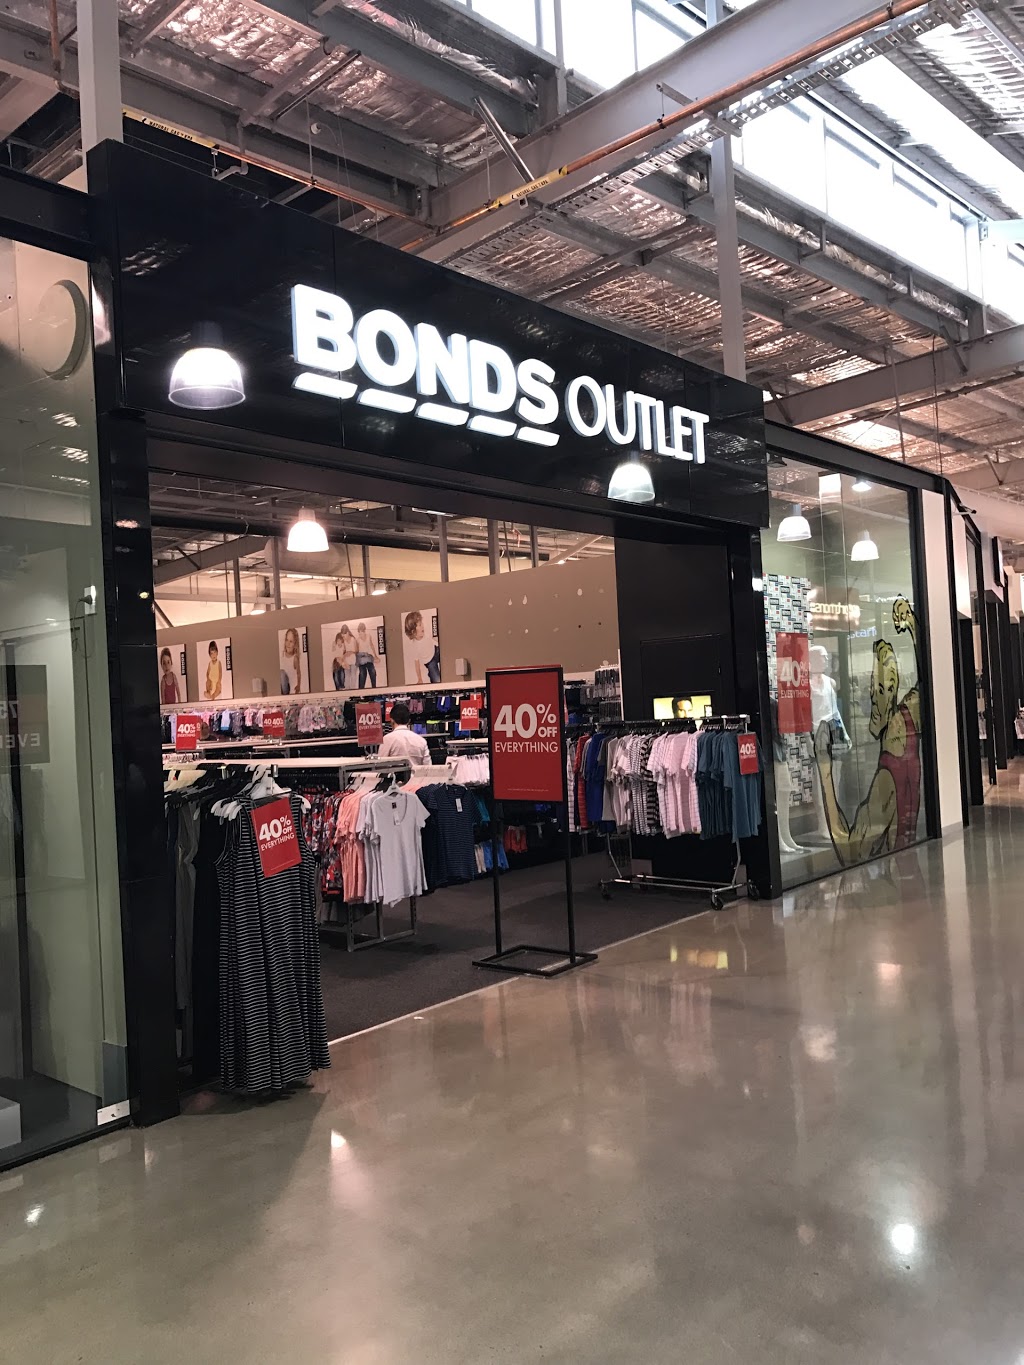 Bonds Outlet Canberra | clothing store | yd Canberra DFO, Shop T174 Newcastle St, Fyshwick ACT 2609, Australia | 0262807548 OR +61 2 6280 7548